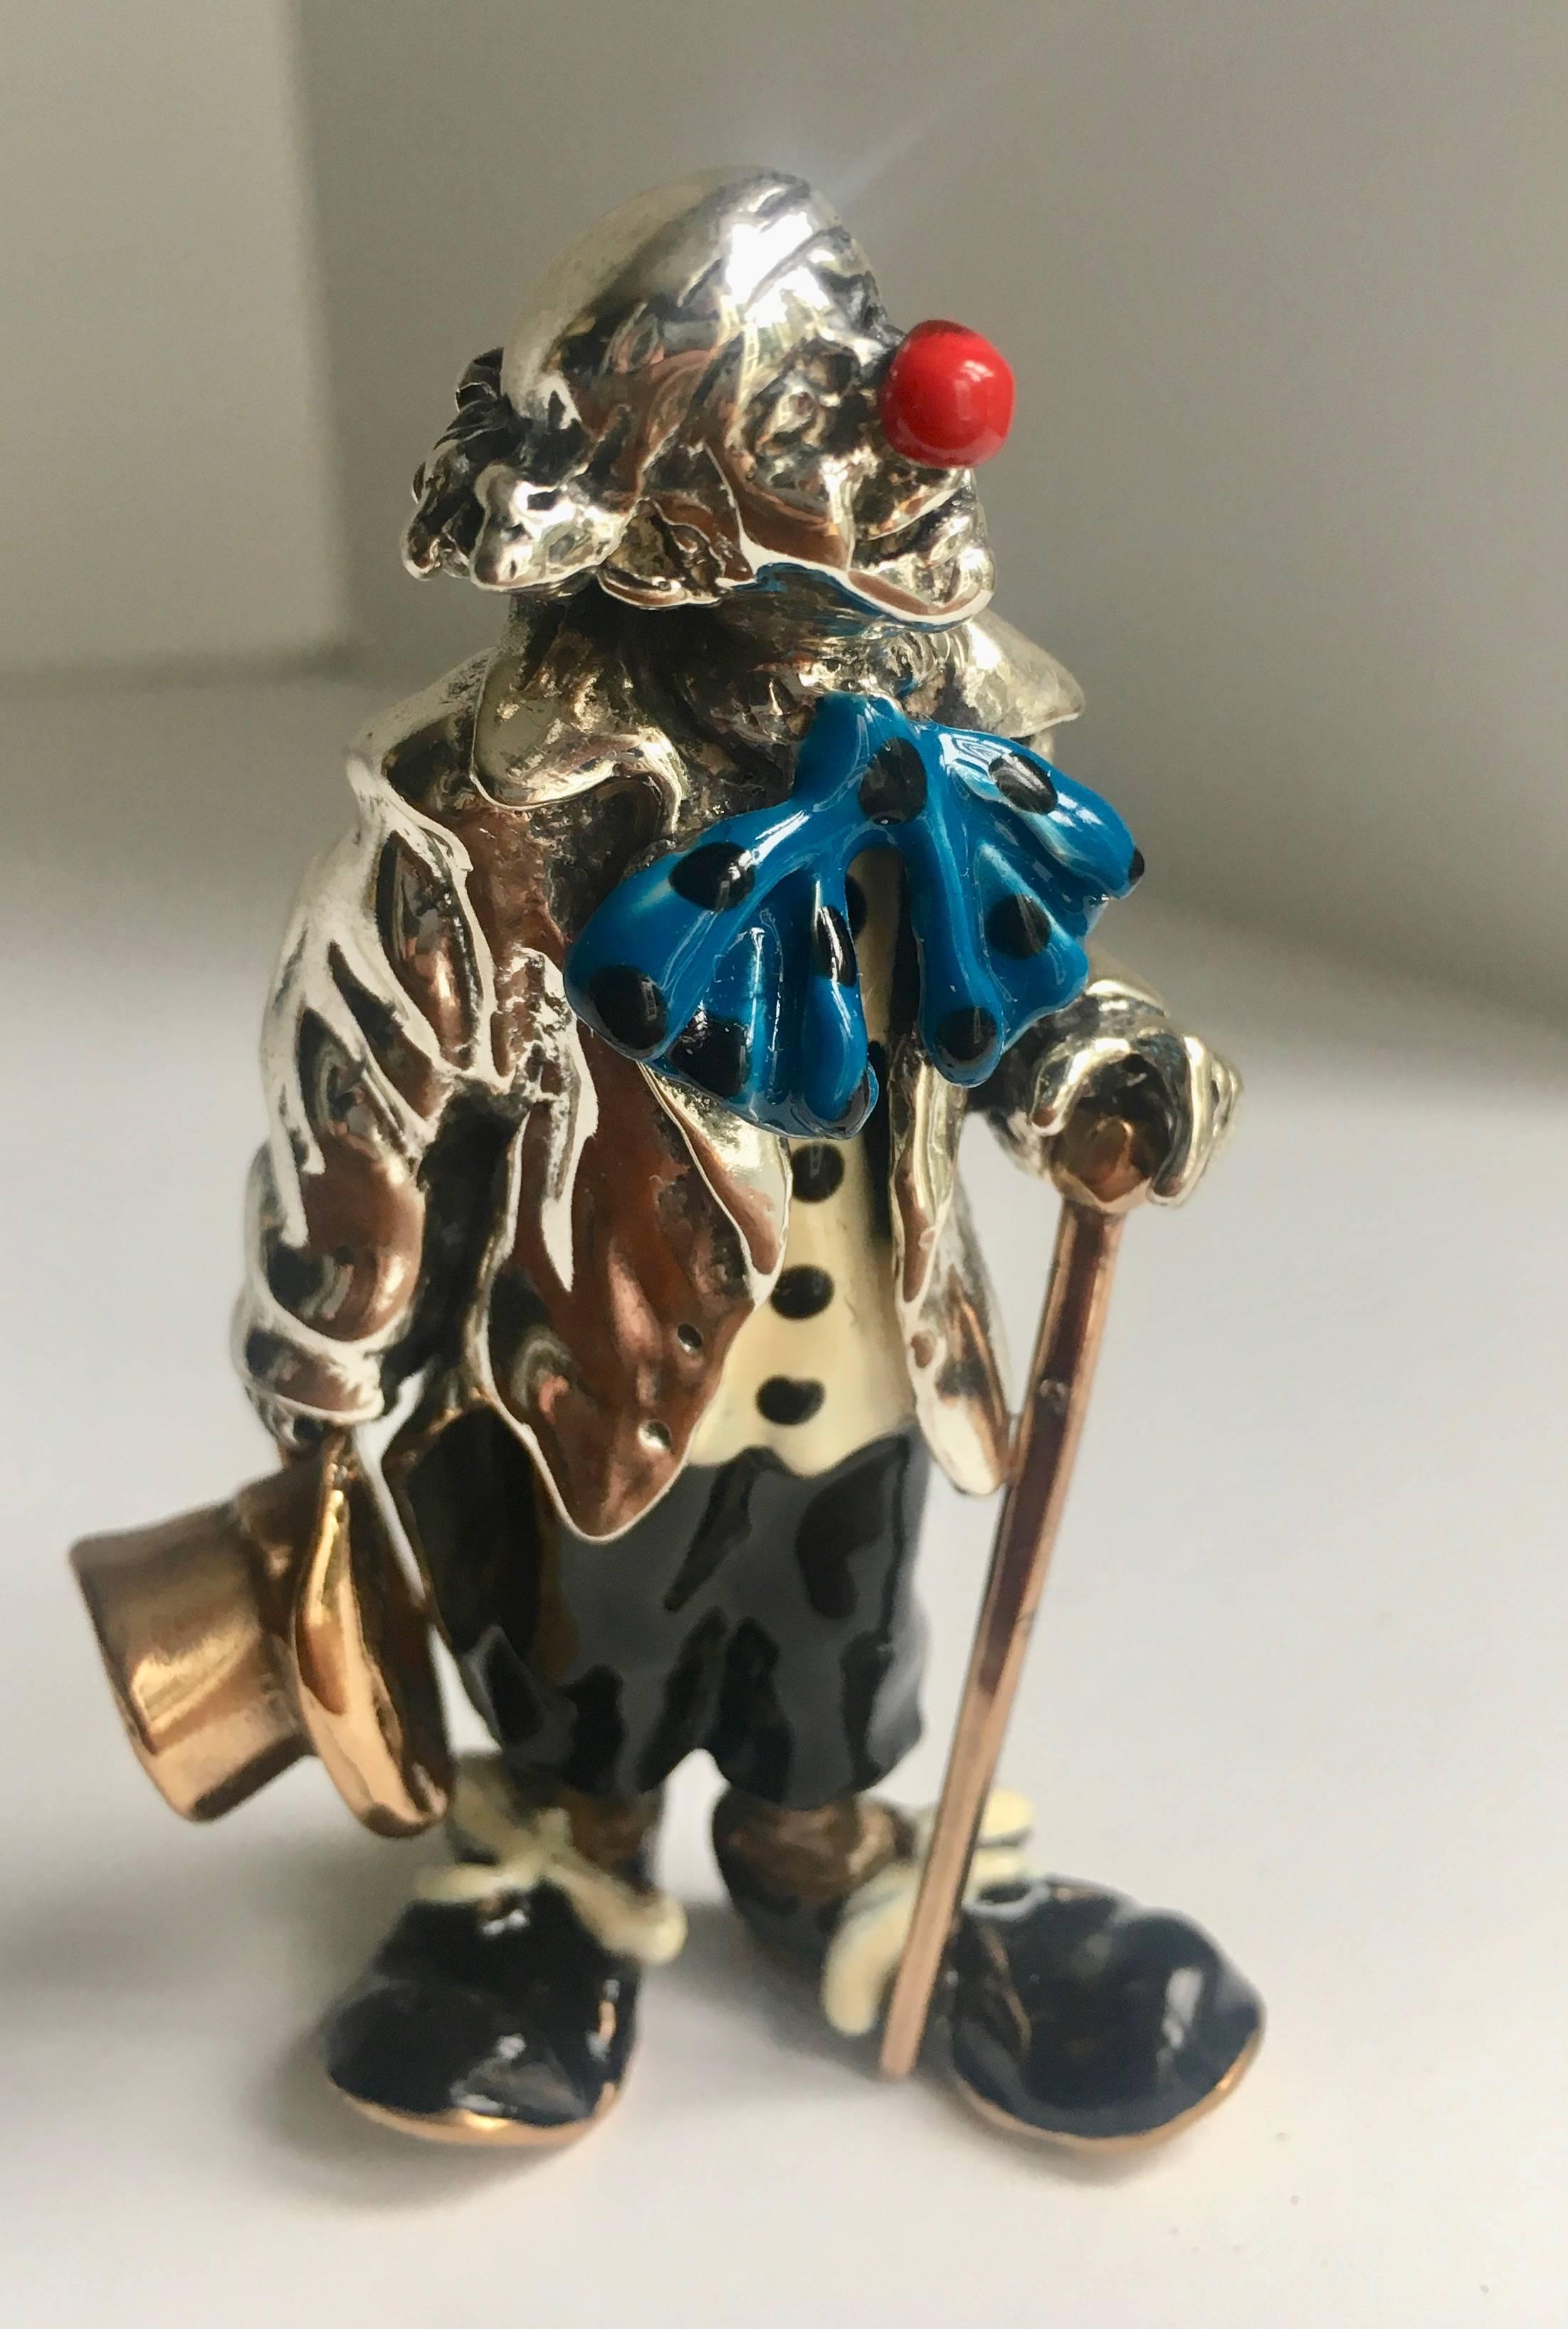 Sterling silver and enamel clown figure - reminiscent of the Tiffany sterling figures and likely by the same artist, Gene Moore - Marked 925 on leg 

This is a lovely piece for a children's shelf, office or desk.